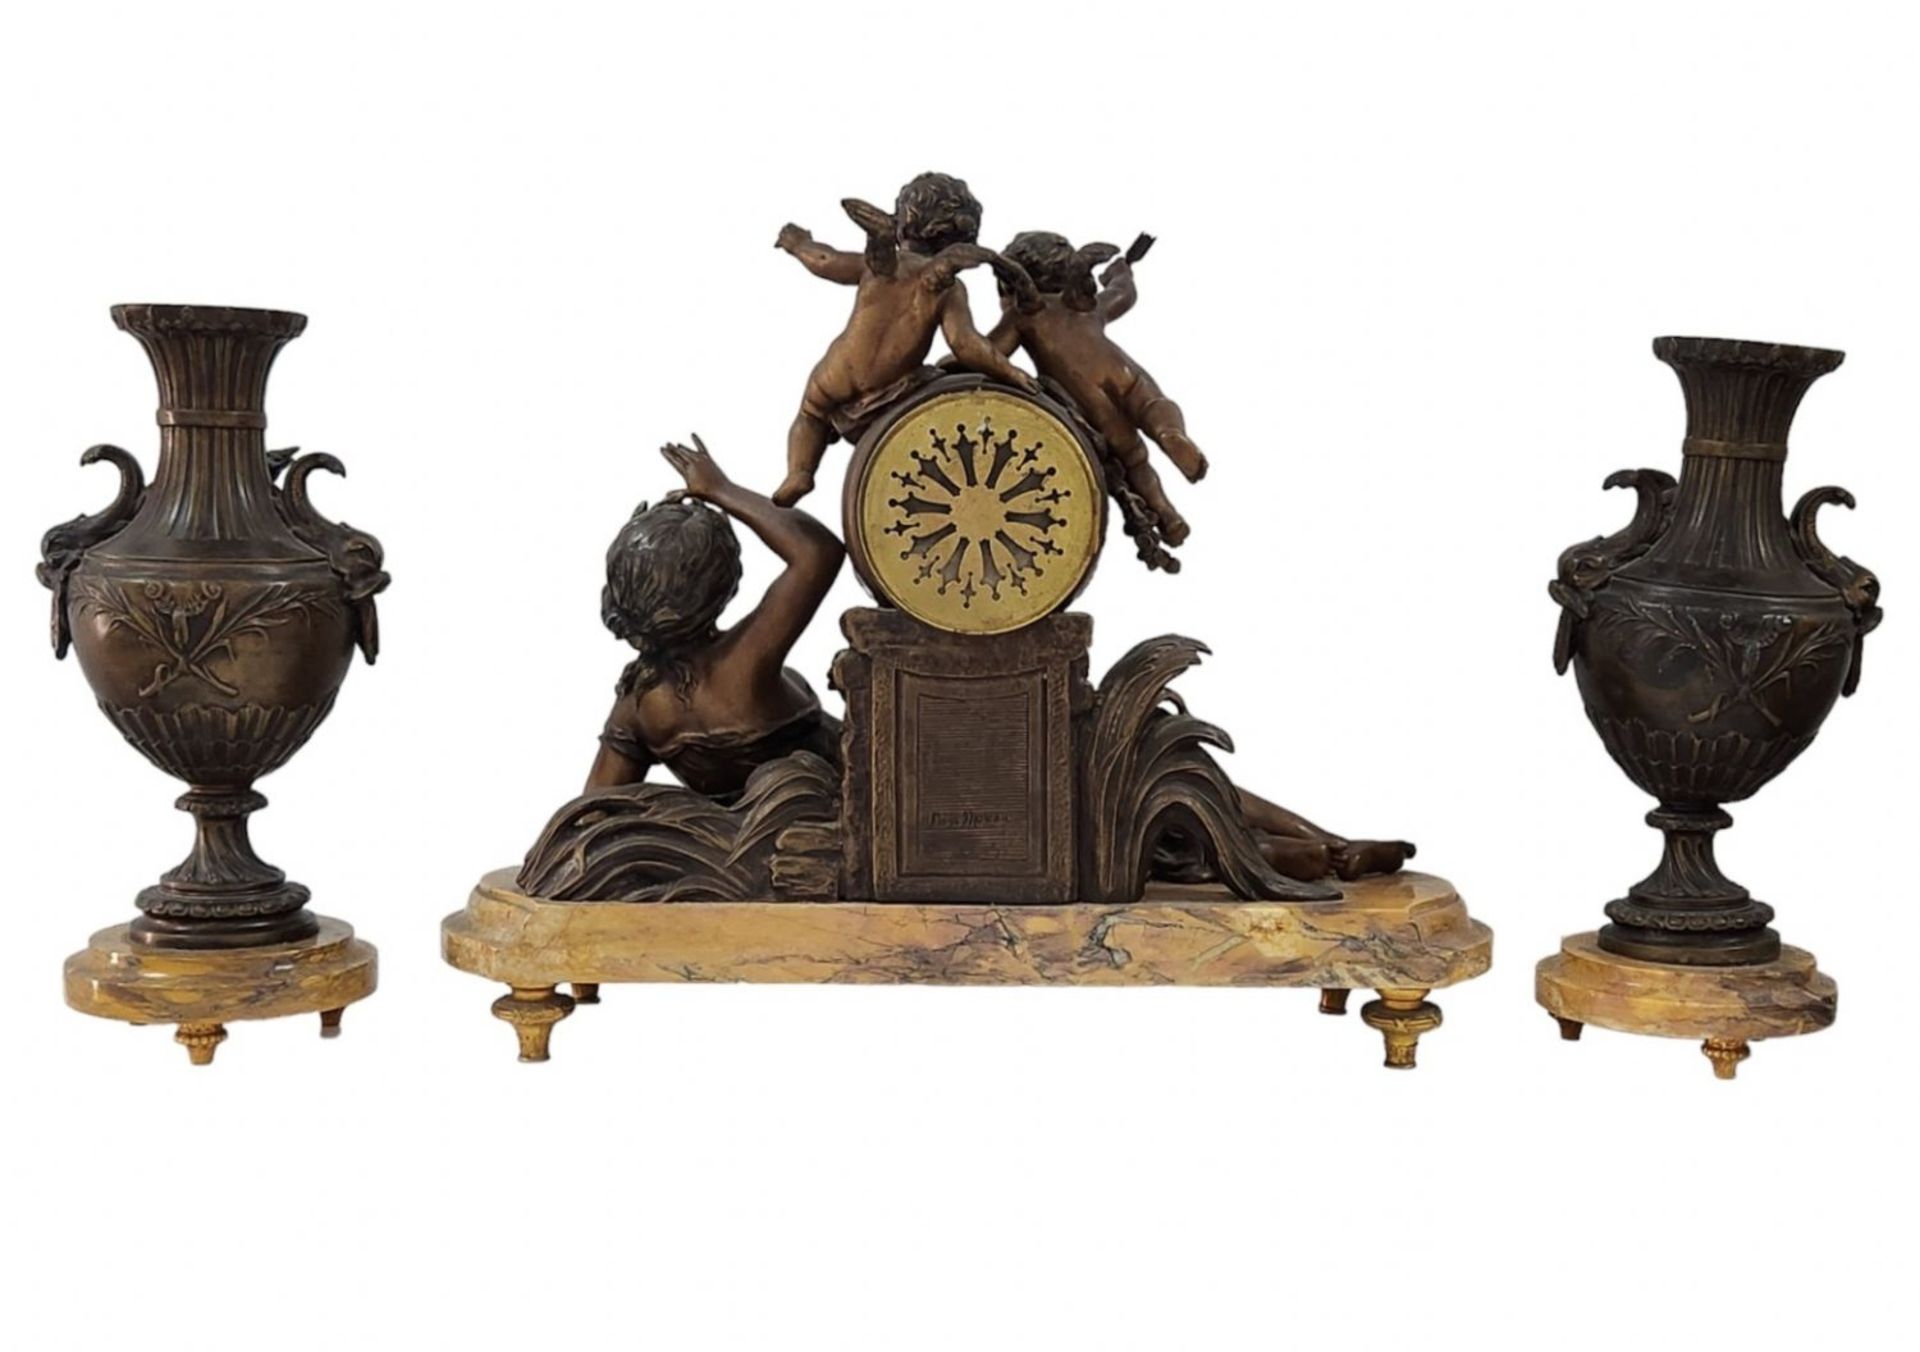 'Angels surprising a Nymph' - Antique French Mantel Clock, large and magnificent, made of spelter - Bild 2 aus 11